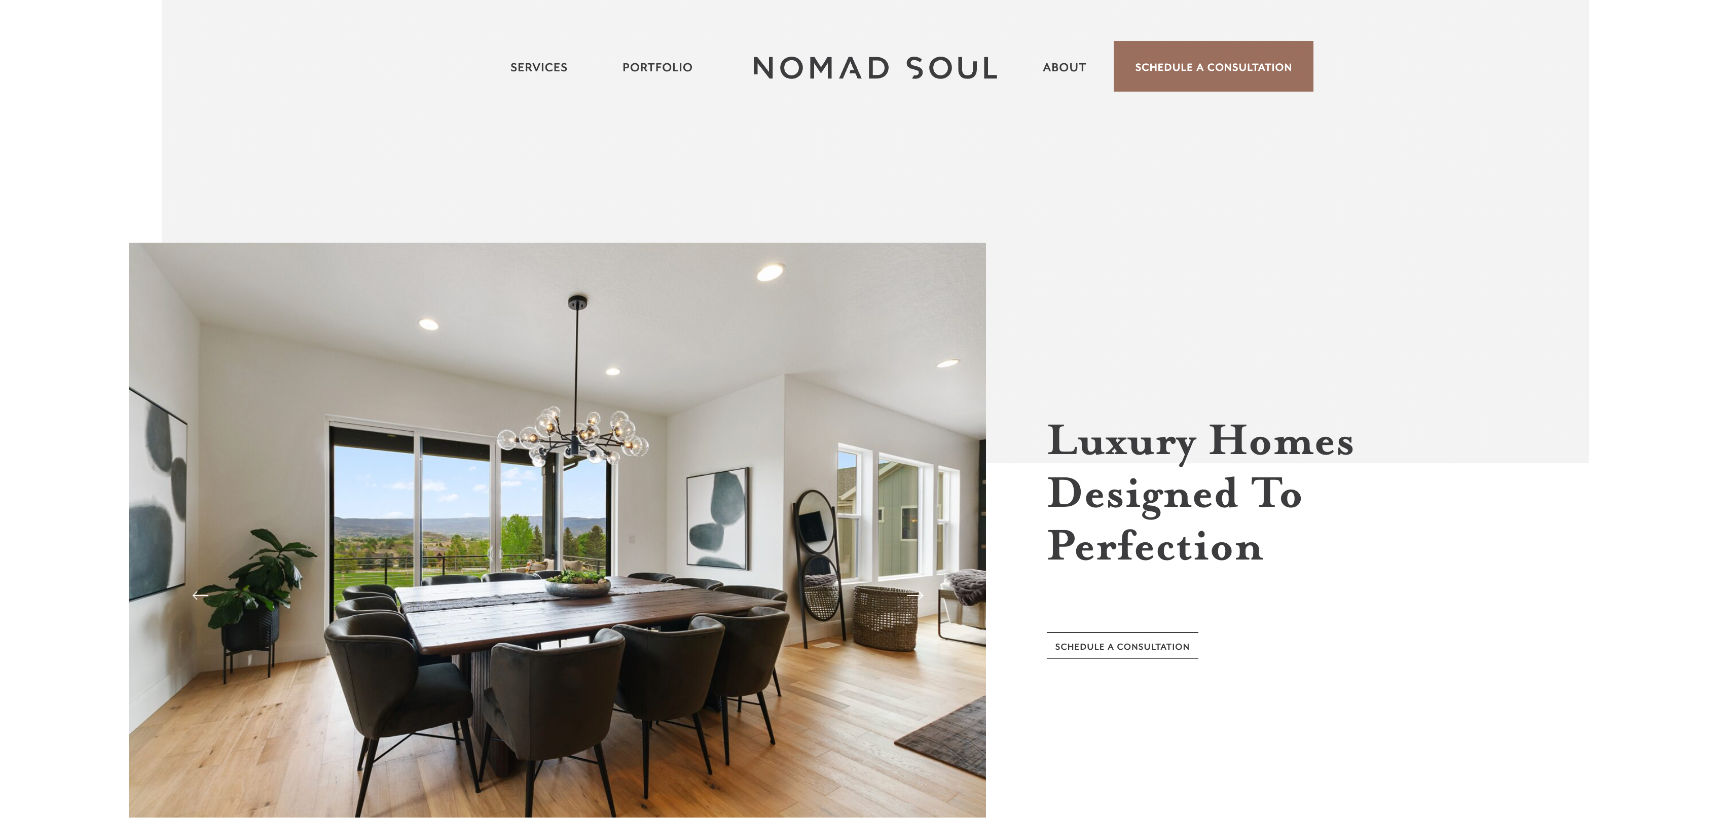 Nomad Soul Interiors Home Page